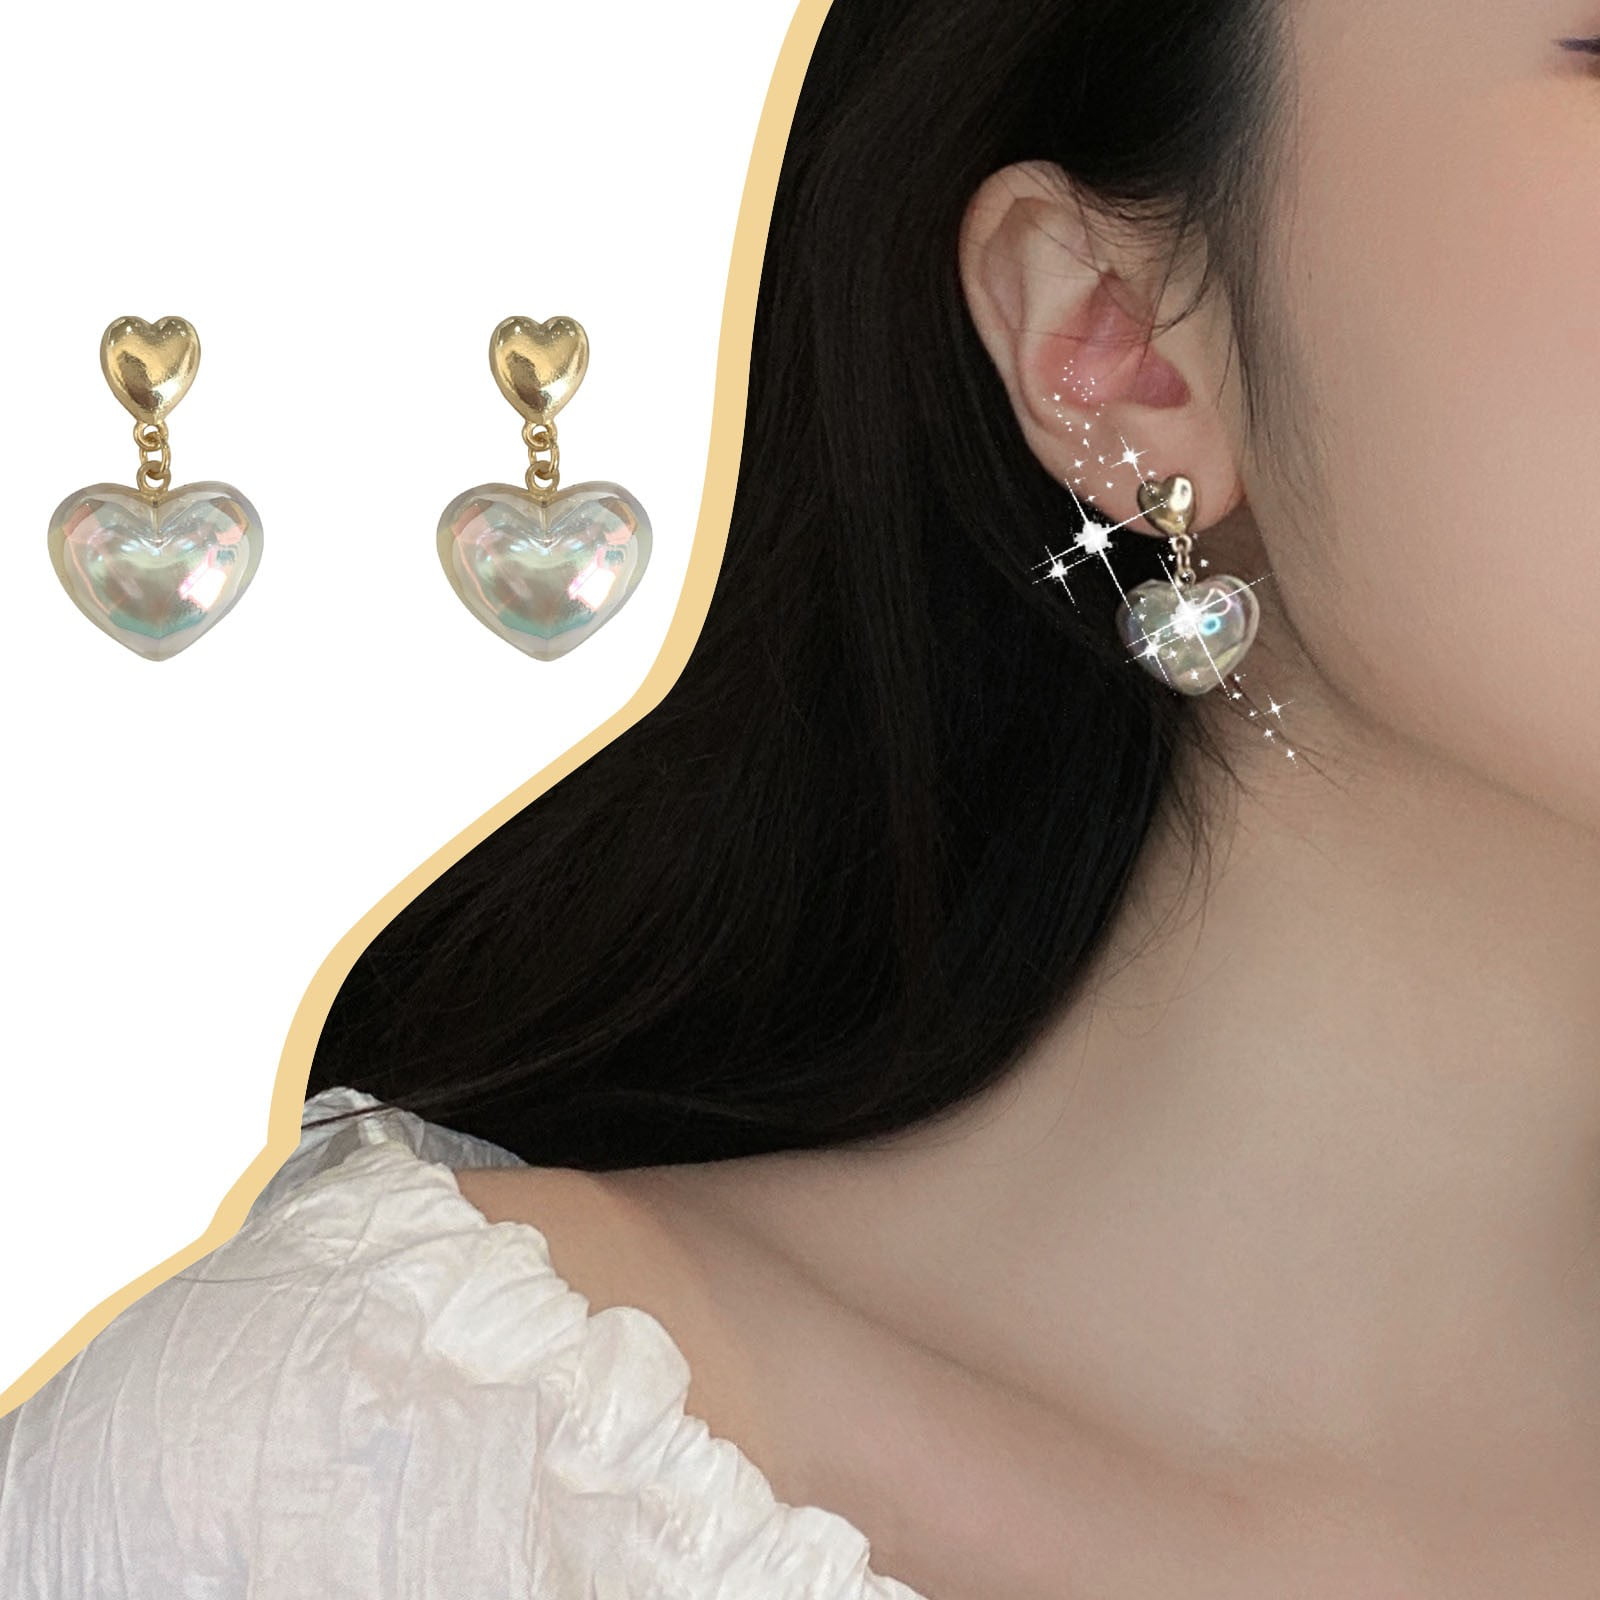 5mm Martini Clear Stud Earrings with Swarovski Crystals in Gold